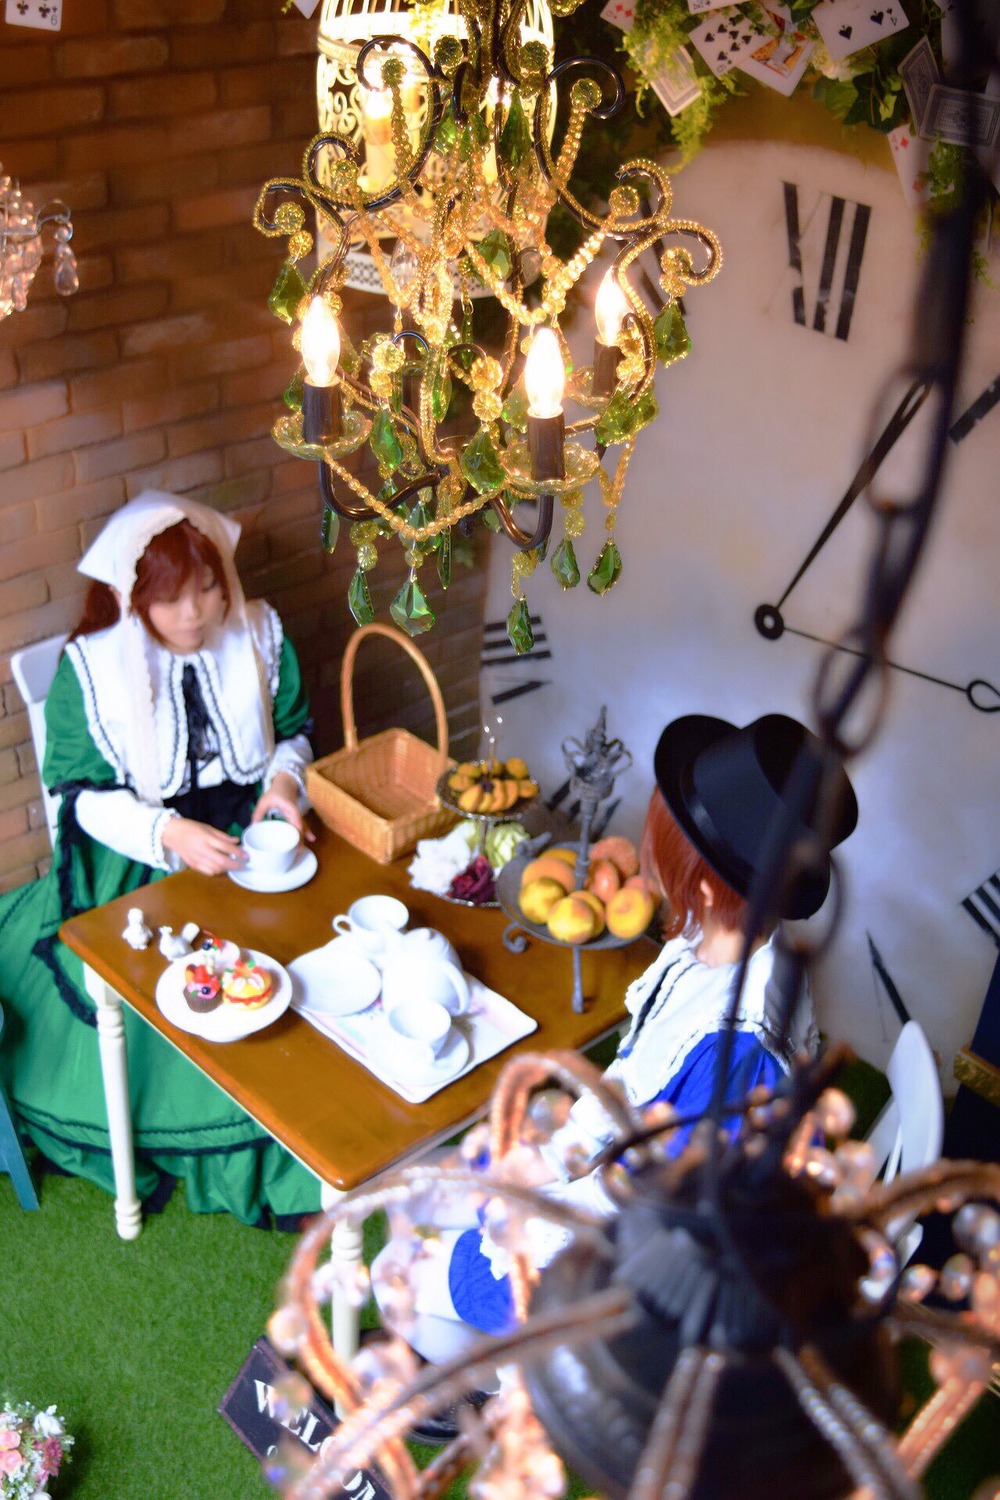 1boy 1girl apron blurry blurry_background blurry_foreground brown_hair cup depth_of_field food fruit hat indoors multiple_cosplay plate sitting table tagme teacup